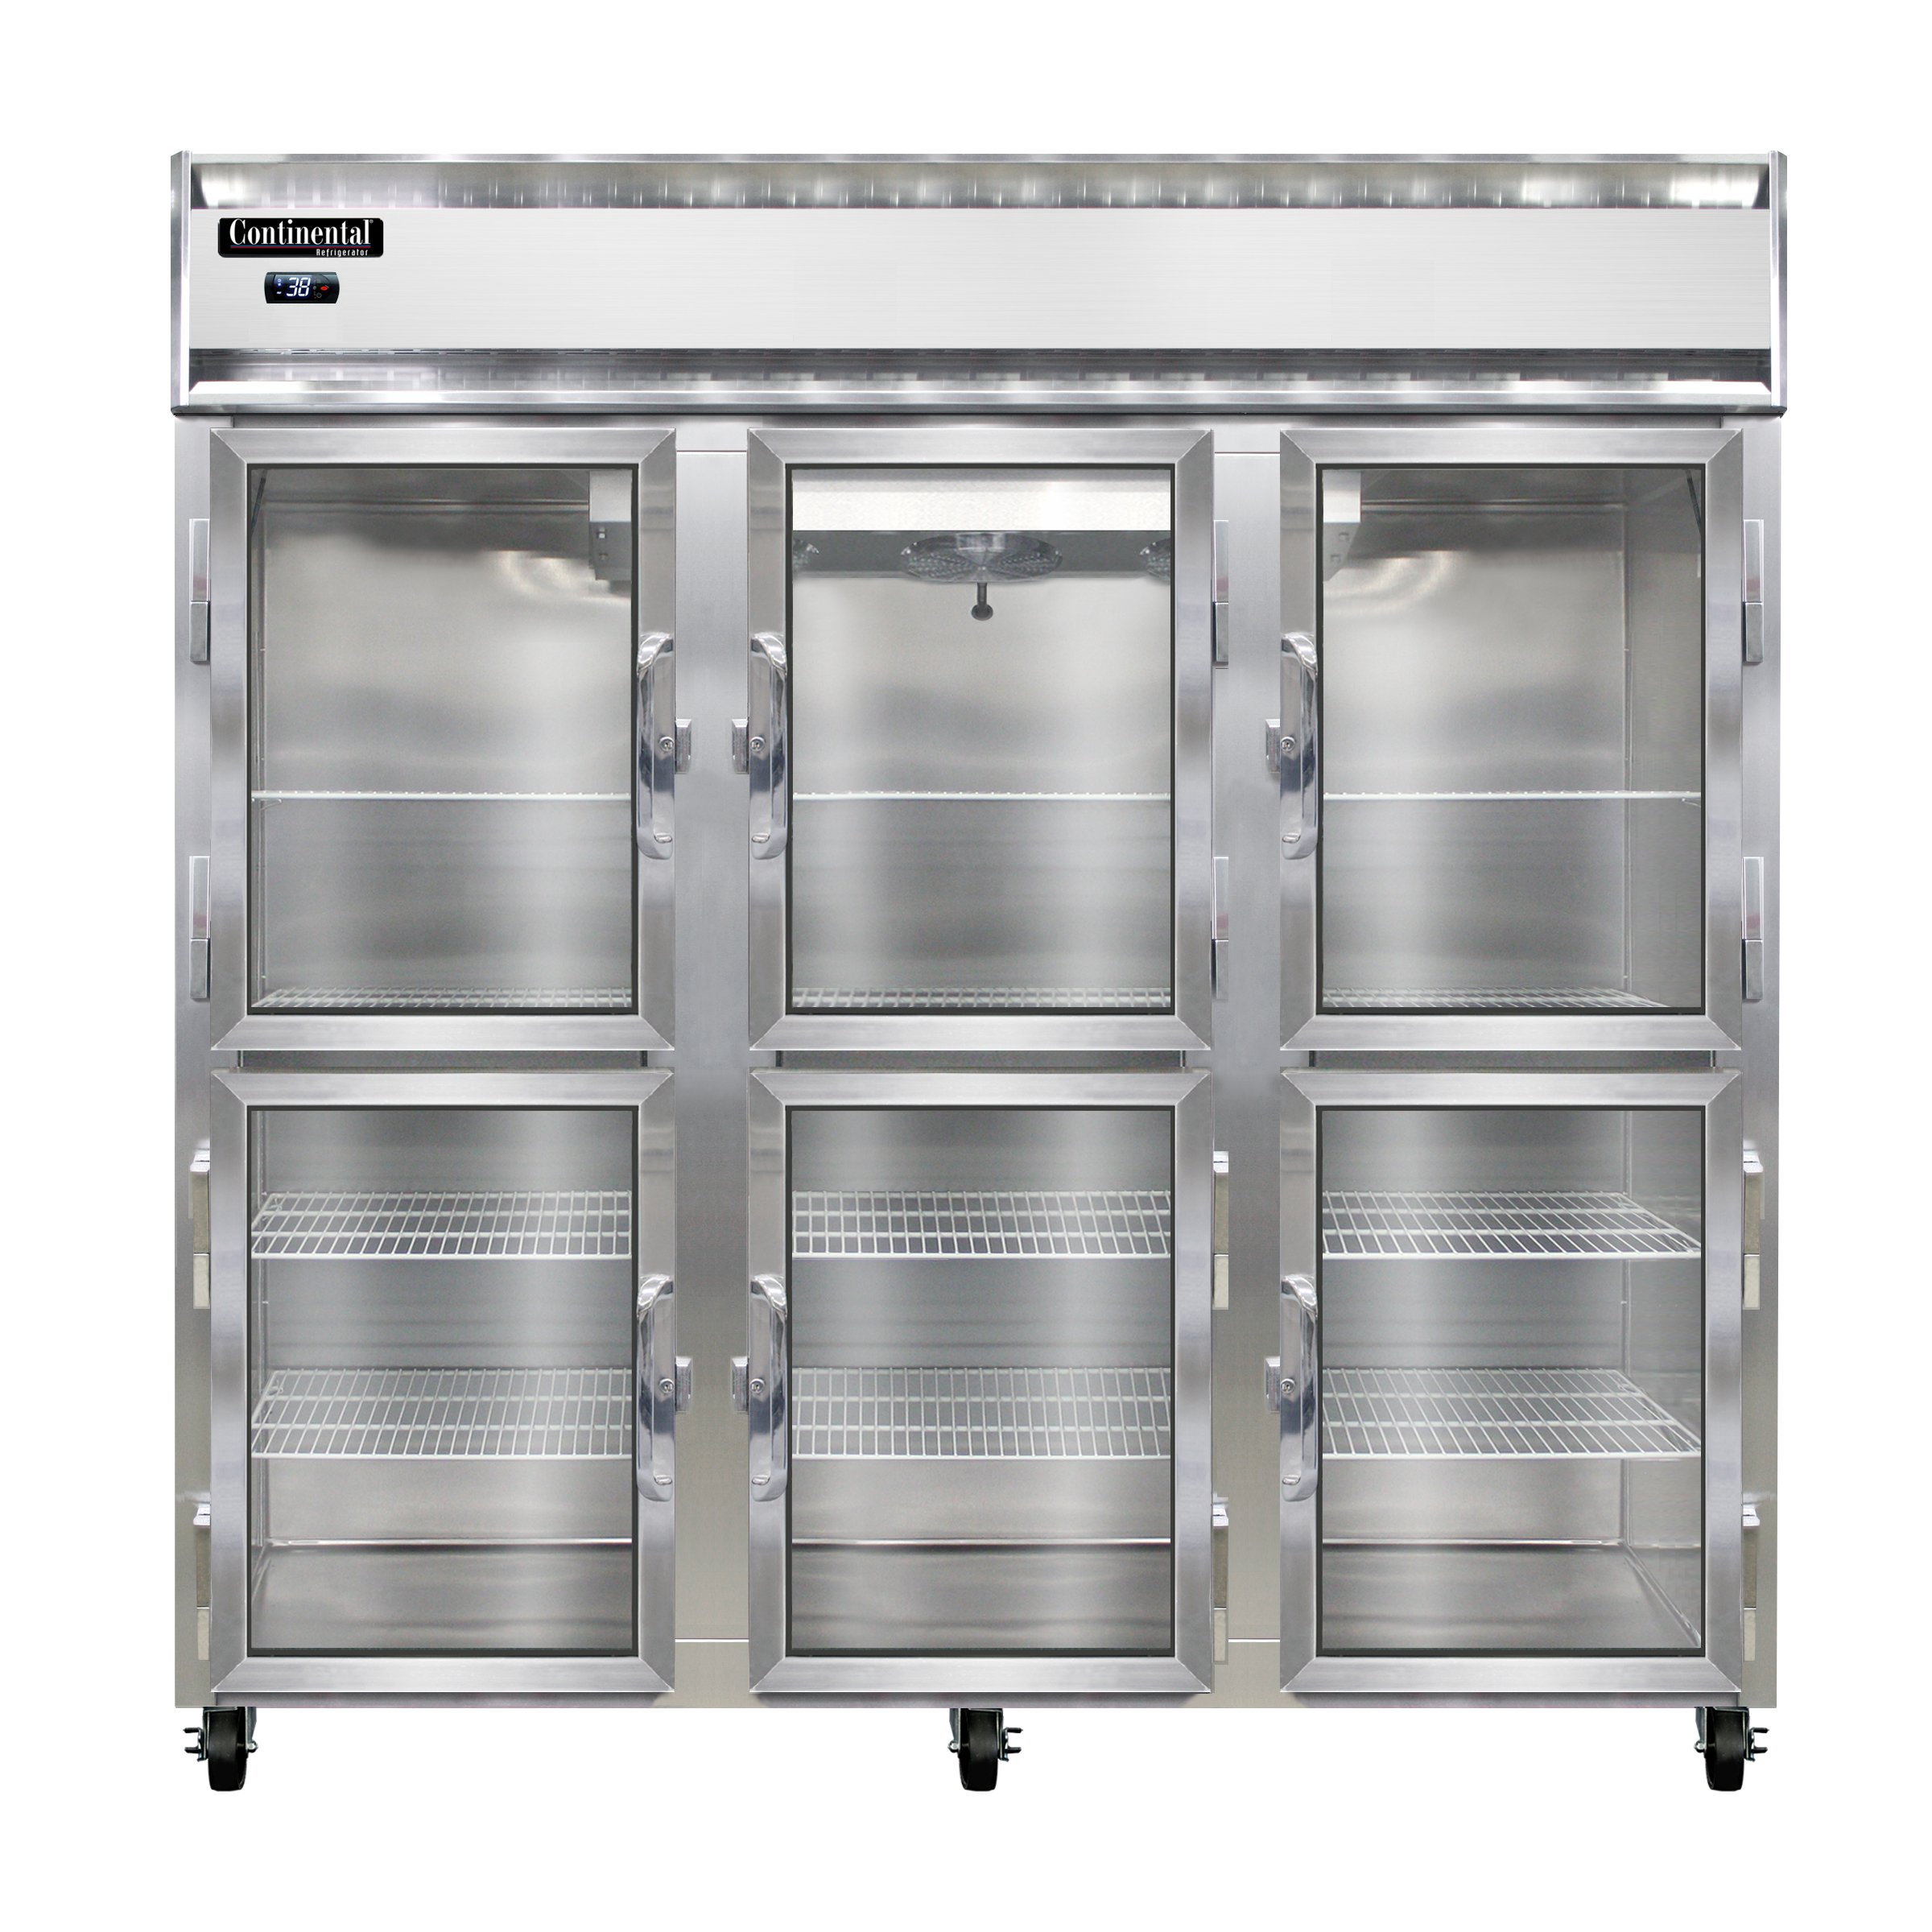 Continental Refrigerator 3RNGDHD 78″ Reach-In Refrigerator w/ 3 Sections, 6 Glass Half-Doors